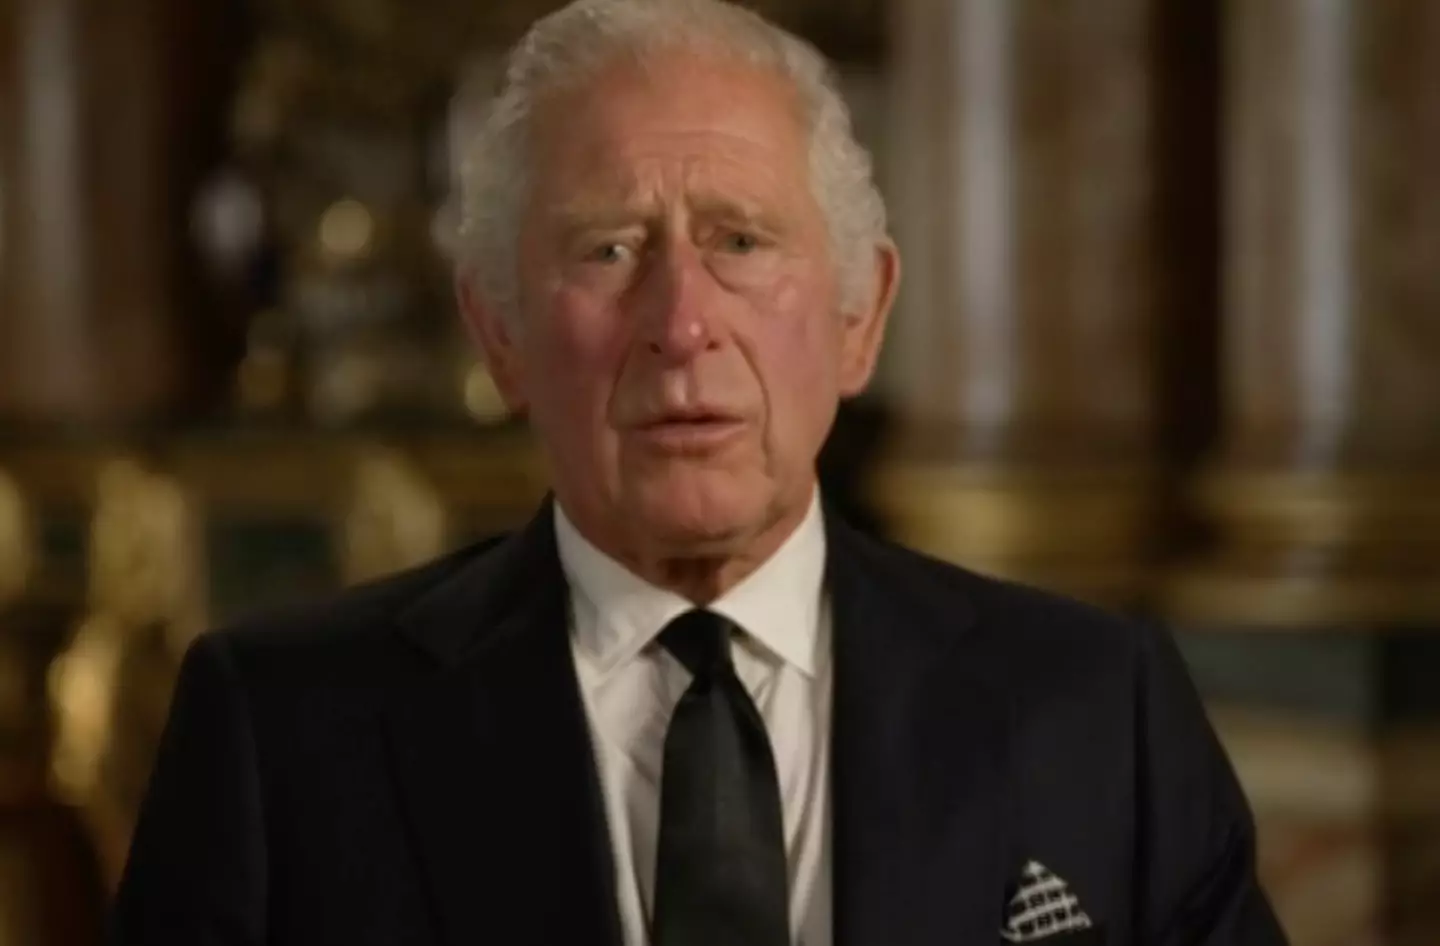 King Charles III gave his first address to the nation on 9 September.